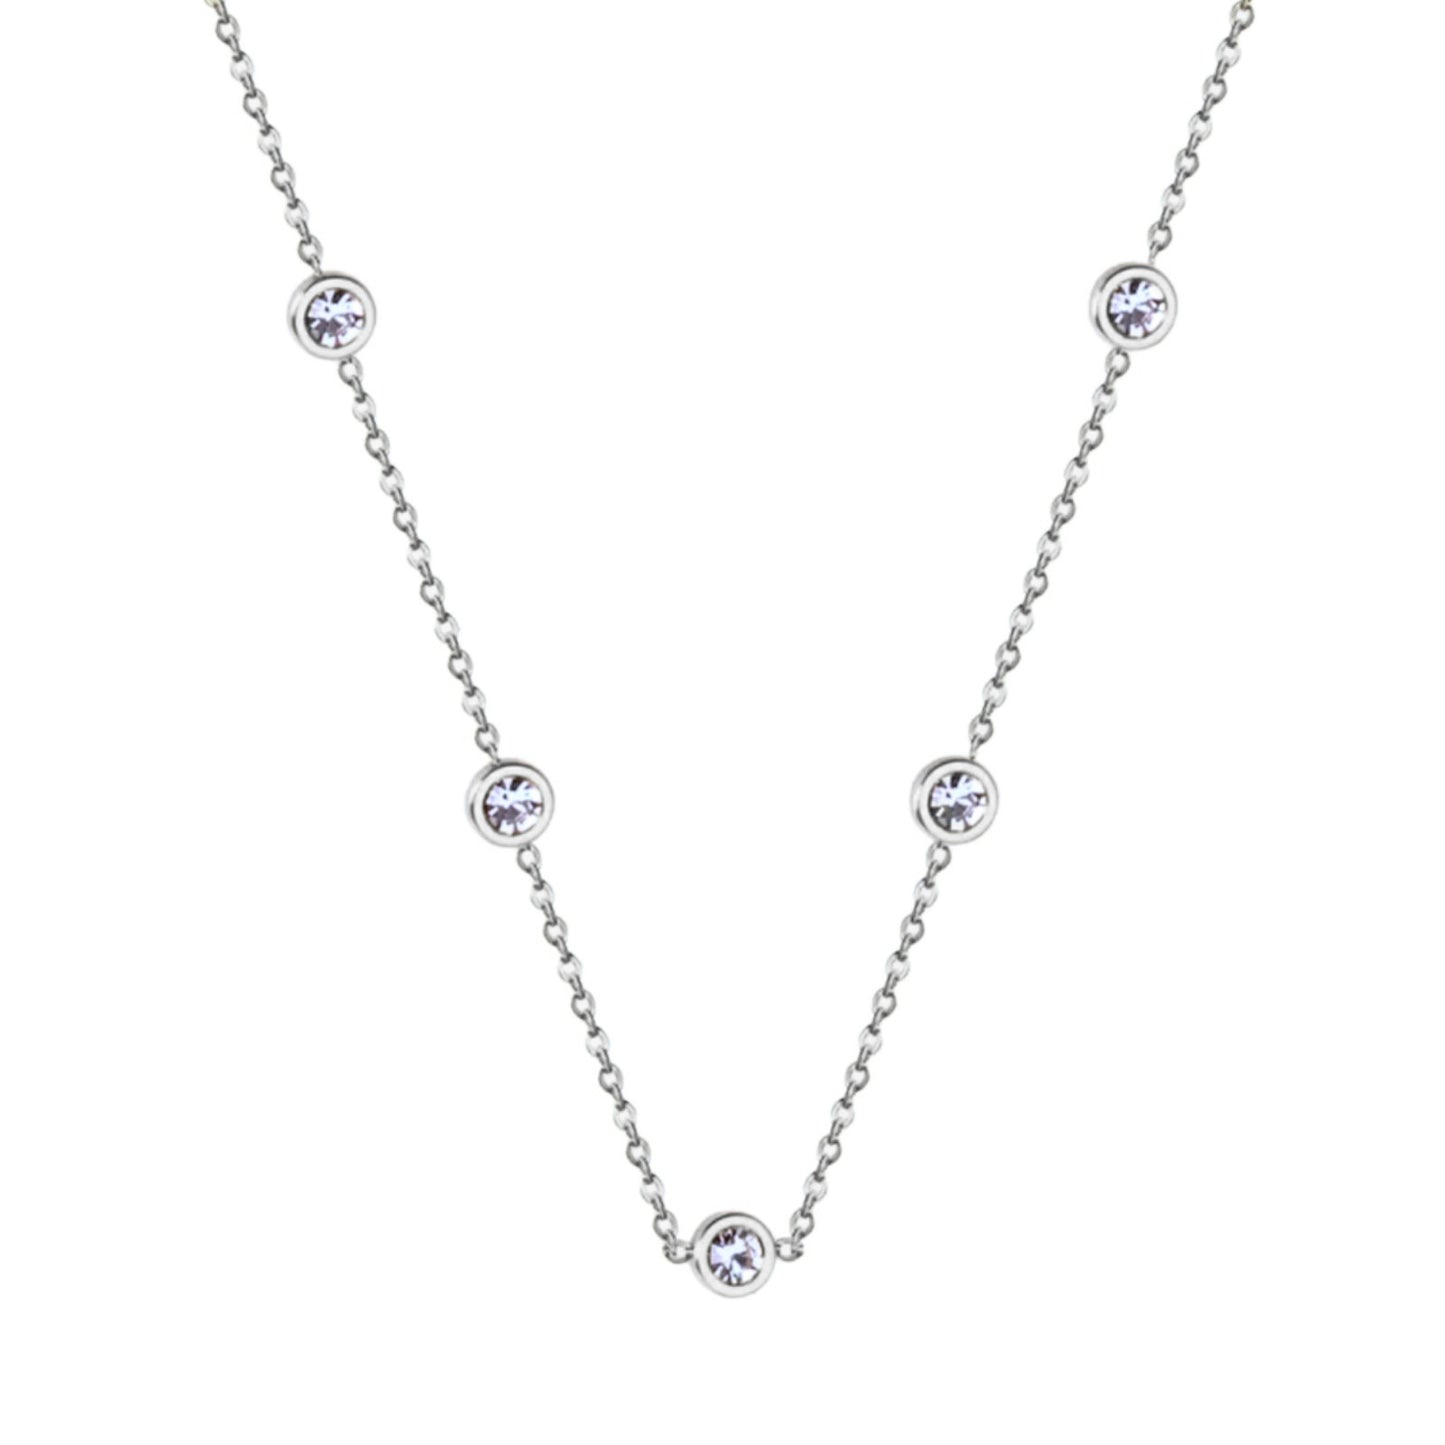 Long Cubic Stainless Steel Necklace